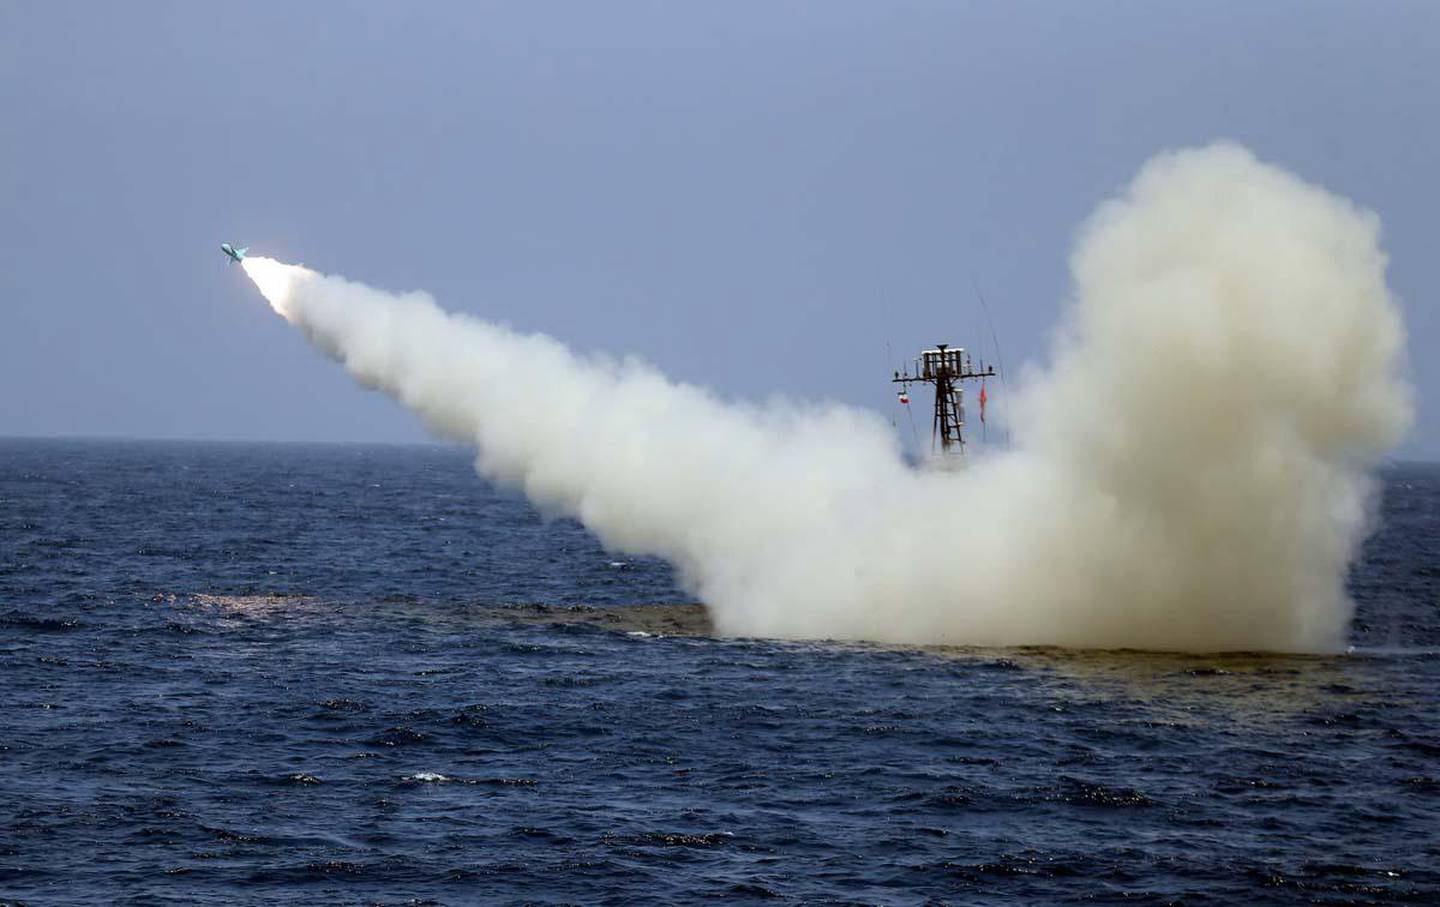 epa08493432 A handout photo made available by the Iranian Army ministry office shows a missile being fired from a war ship during a military exercise in the Gulf of Oman, Iran, 18 June 2020. According to reports, Iran on 18 June 2020 said it successfully tested 'new generation' of cruise missiles during exercise.  EPA/IRANIAN ARMY OFFICE HANDOUT  HANDOUT EDITORIAL USE ONLY/NO SALES